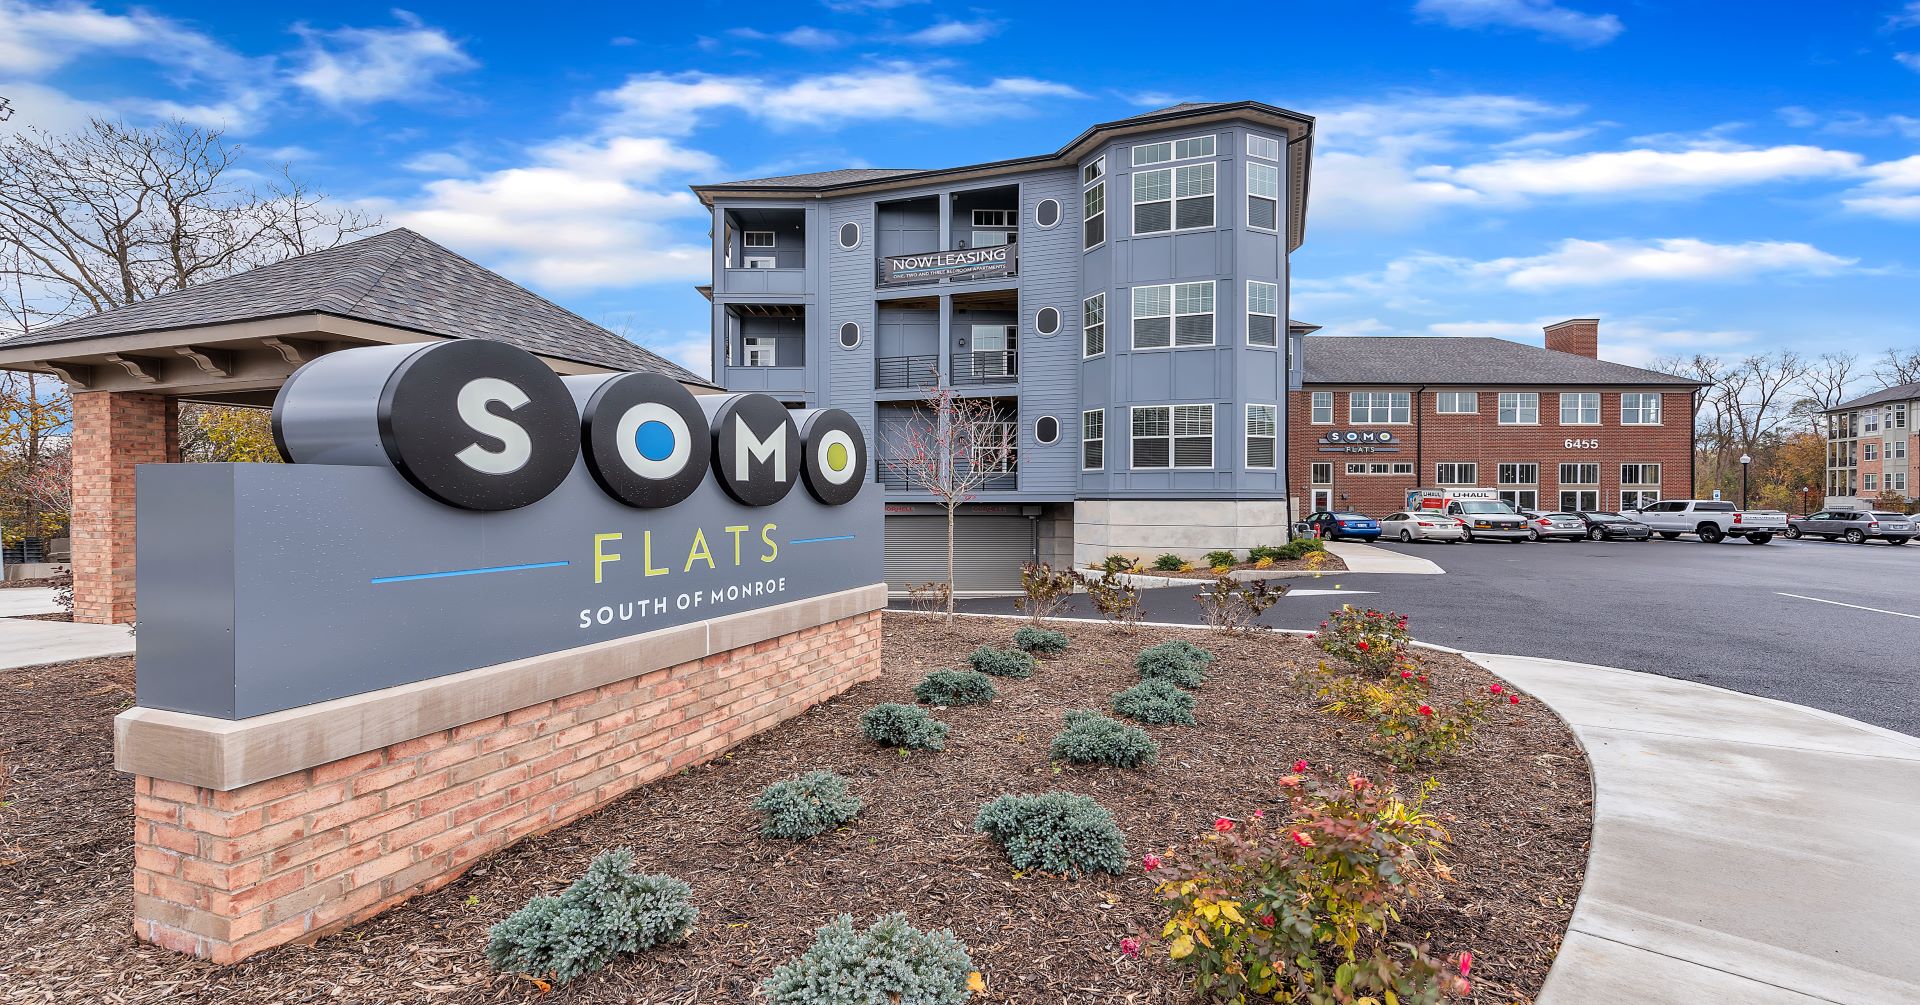 SOMO Sign with Building